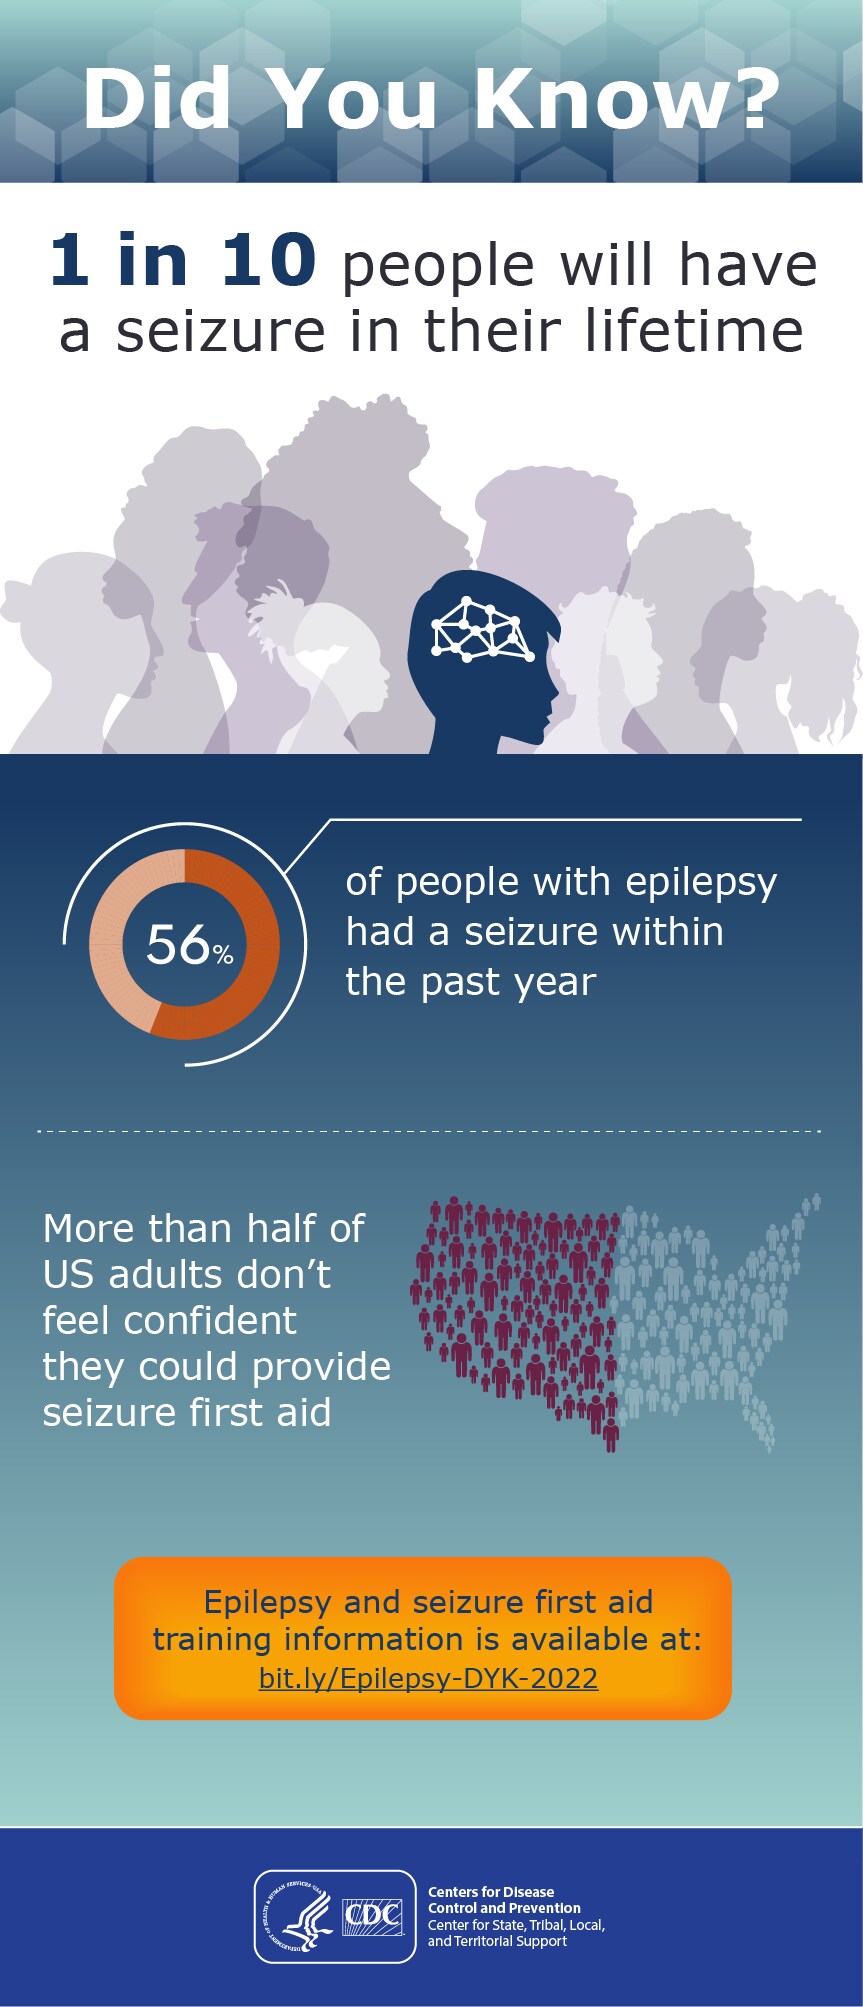 An infographic titled Did You Know? Text says: 1 in 10 people will have a seizure in their lifetime. Fifty-six percent of people with epilepsy had a seizure within the past year. More than half of US adults don’t feel confident they could provide seizure first aid. Epilepsy and seizure first aid training information is available at bit.ly/Epilepsy-DYK-2022.